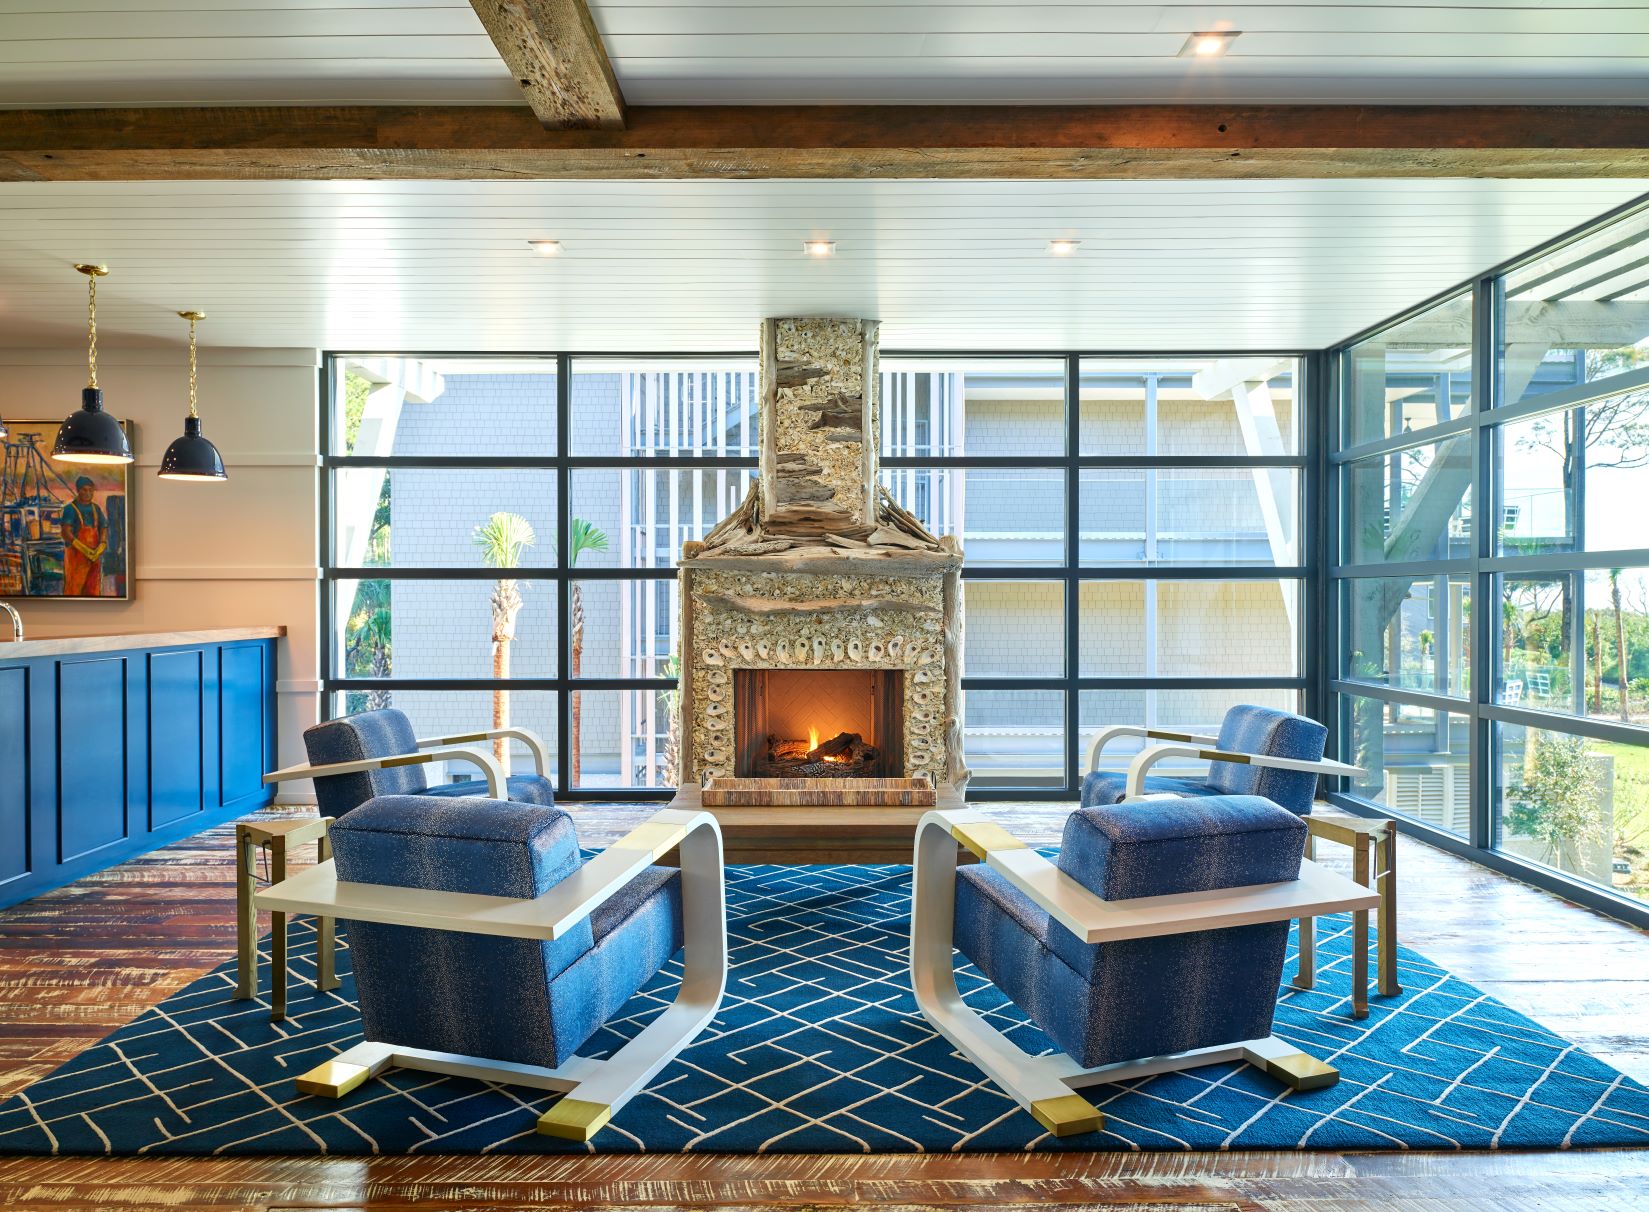 Tabby and driftwood fireplace surrounded by whote and brass lounge chairs at Timbers Kiawah Clubhouse on Kiawah Island